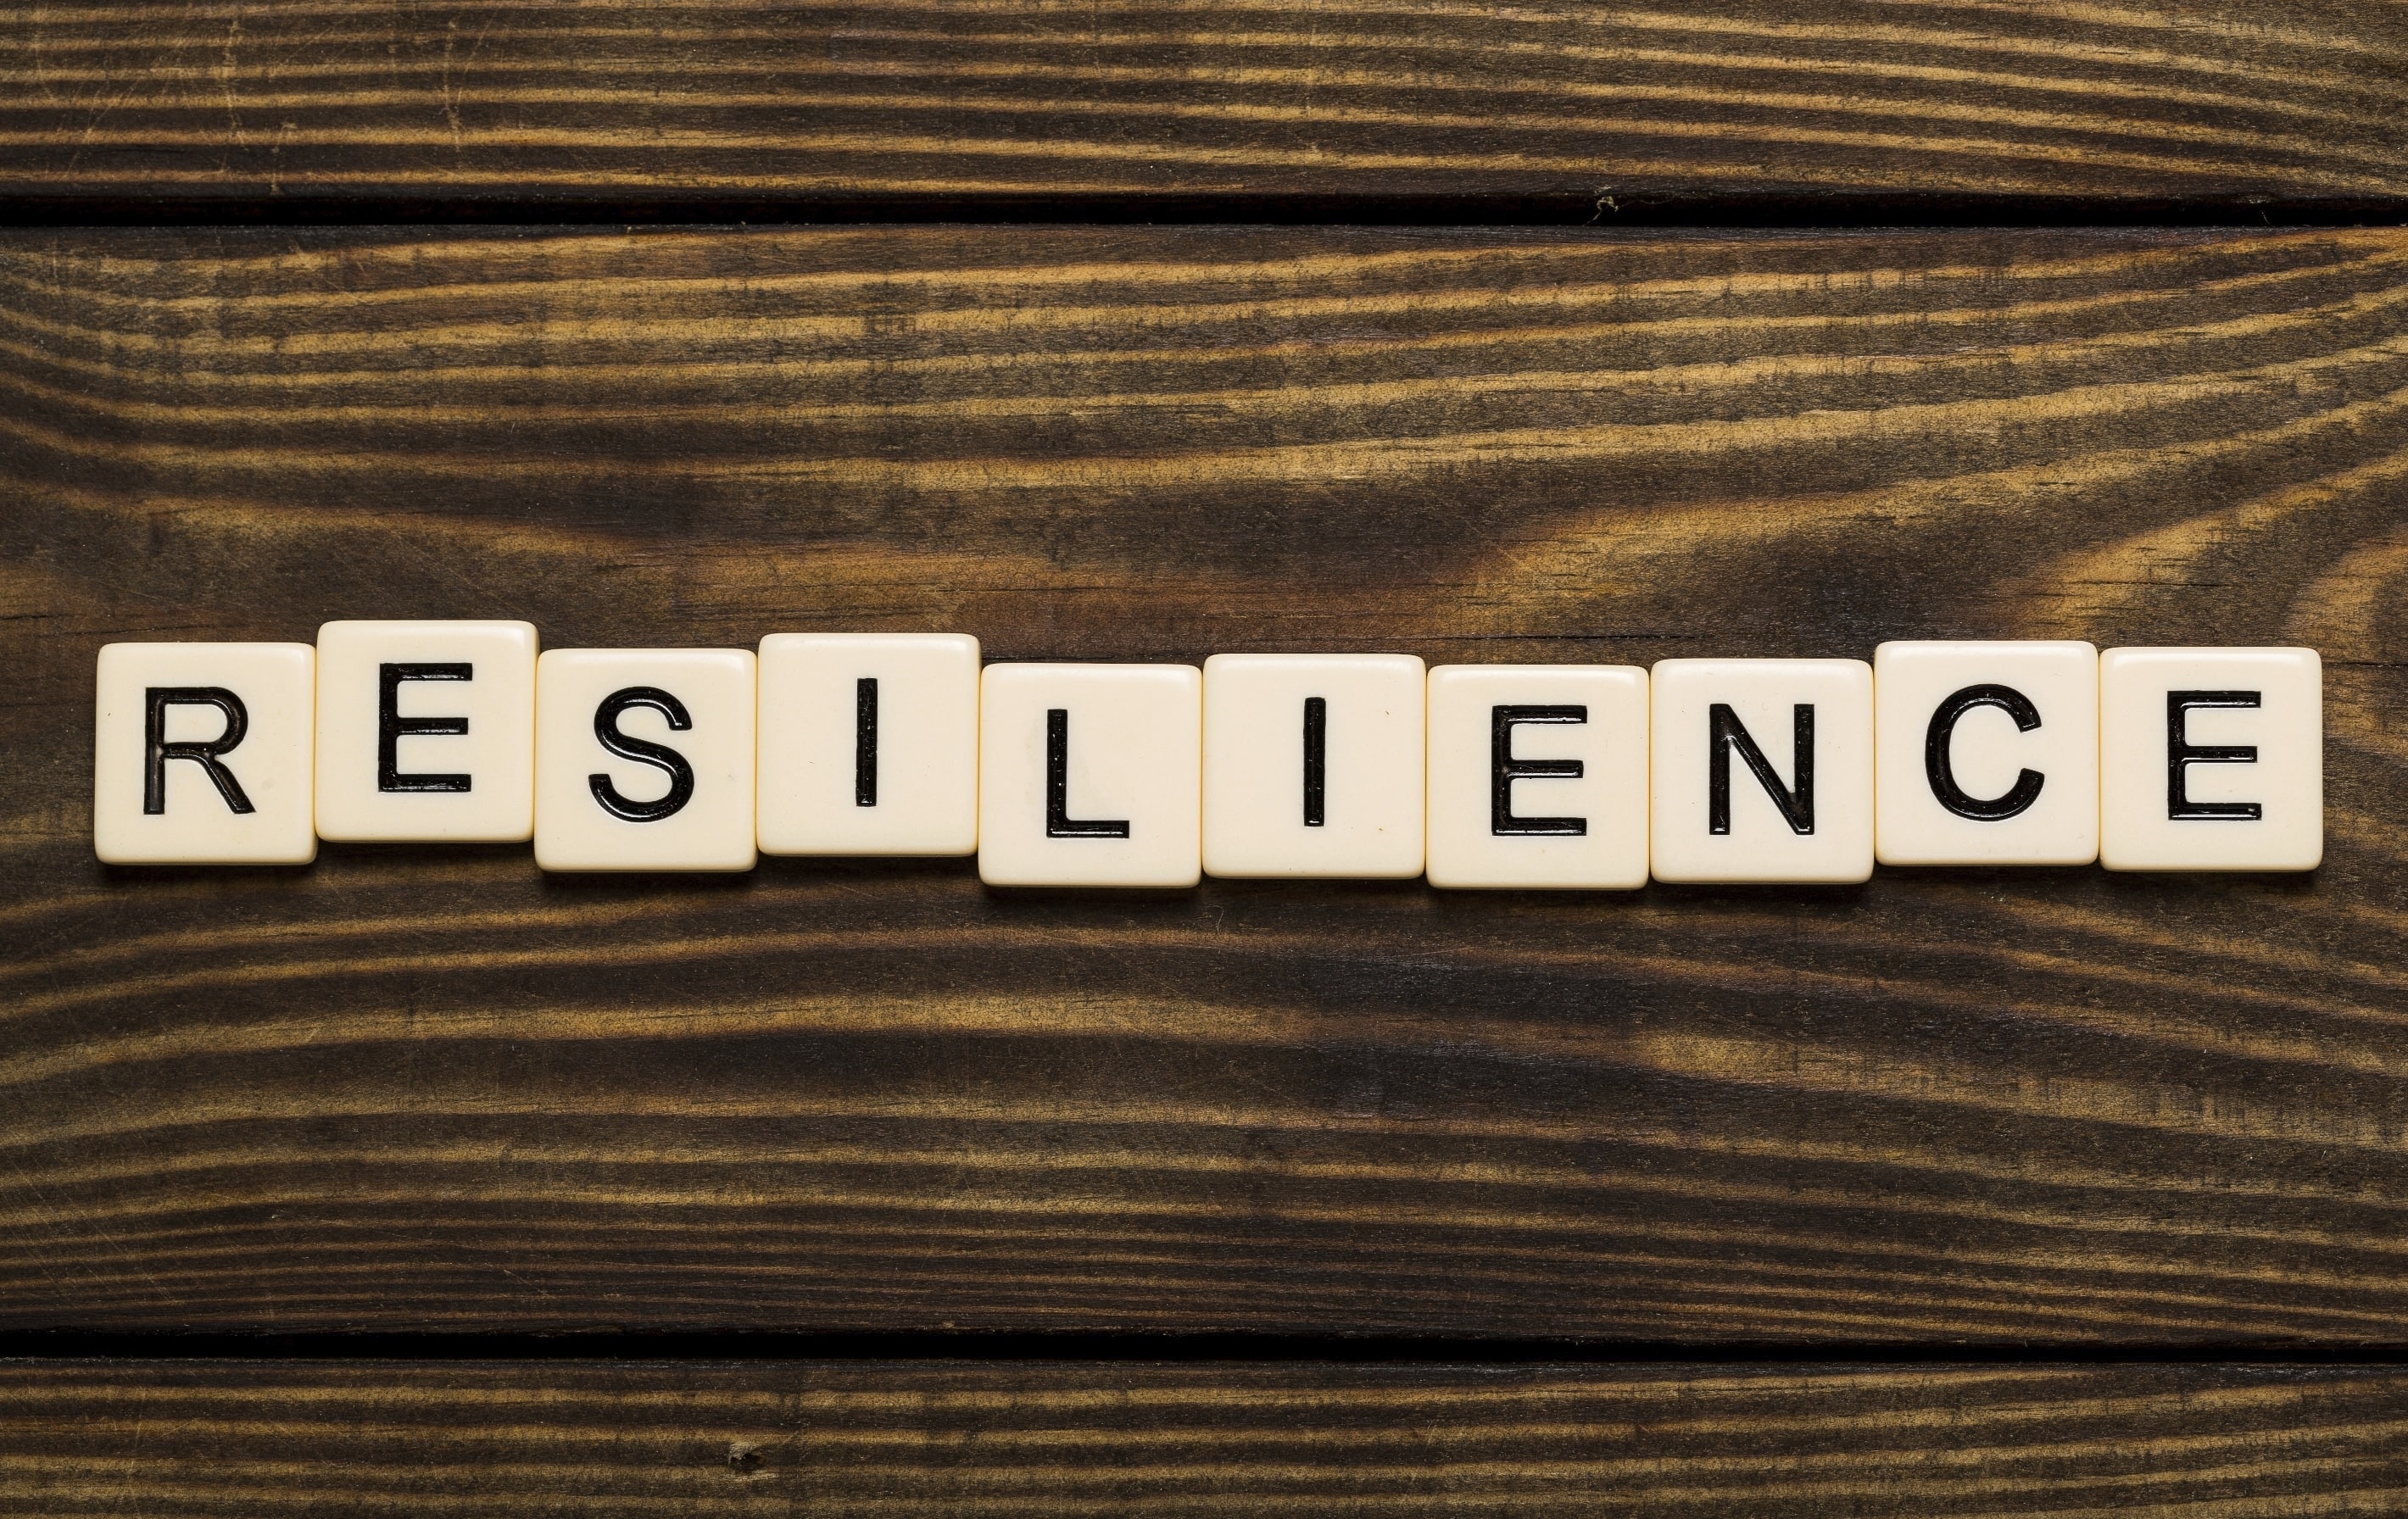 the word Resilience spelt using Scrabble letters